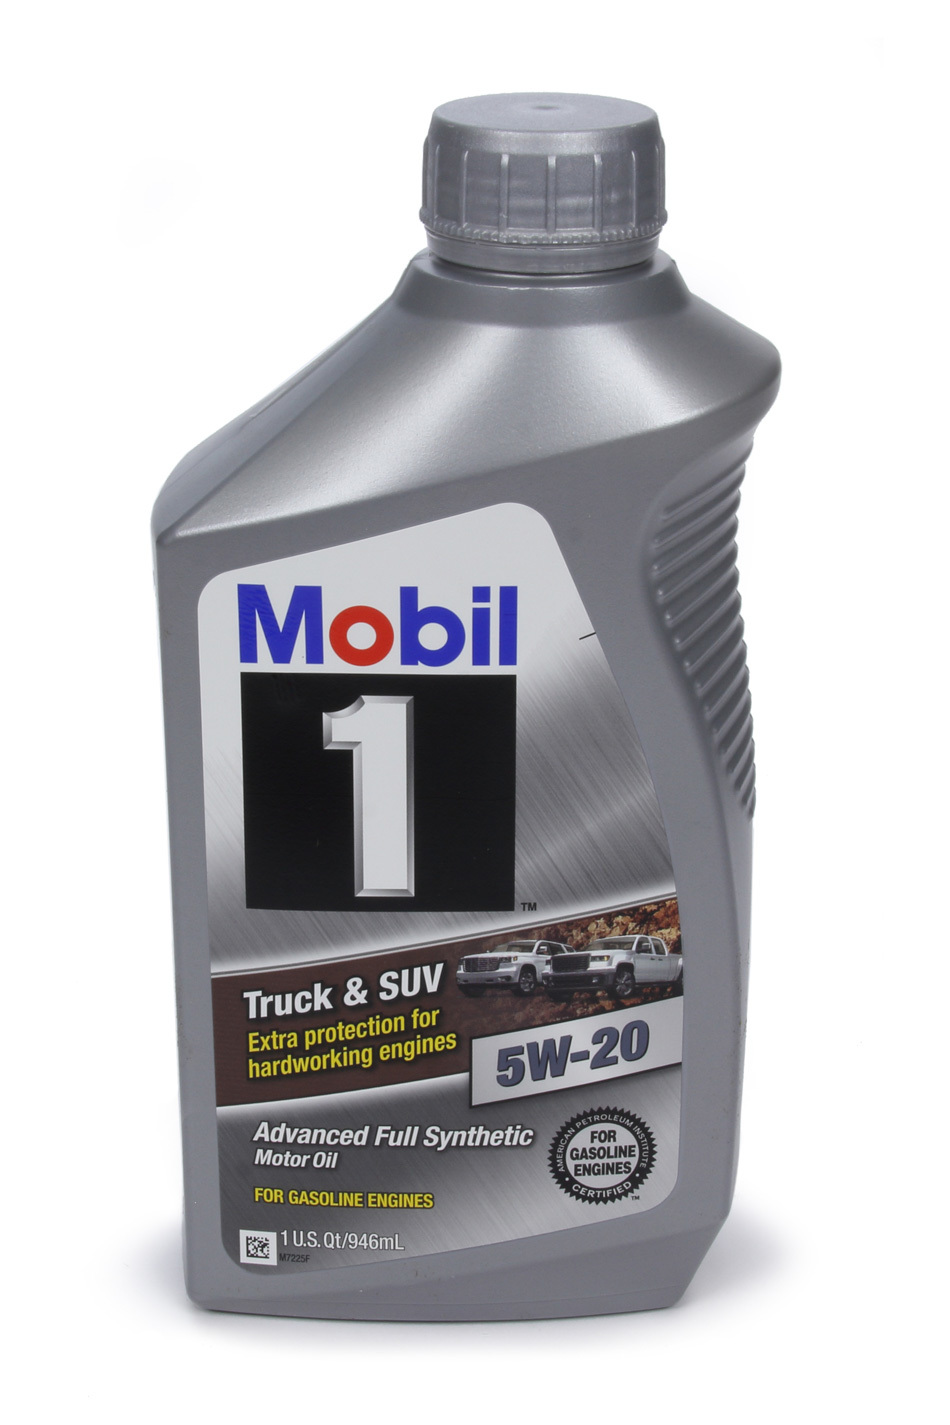 MOBIL 1 Motor Oil Truck and SUV 5W20 Synthetic 1 qt Bottle Each